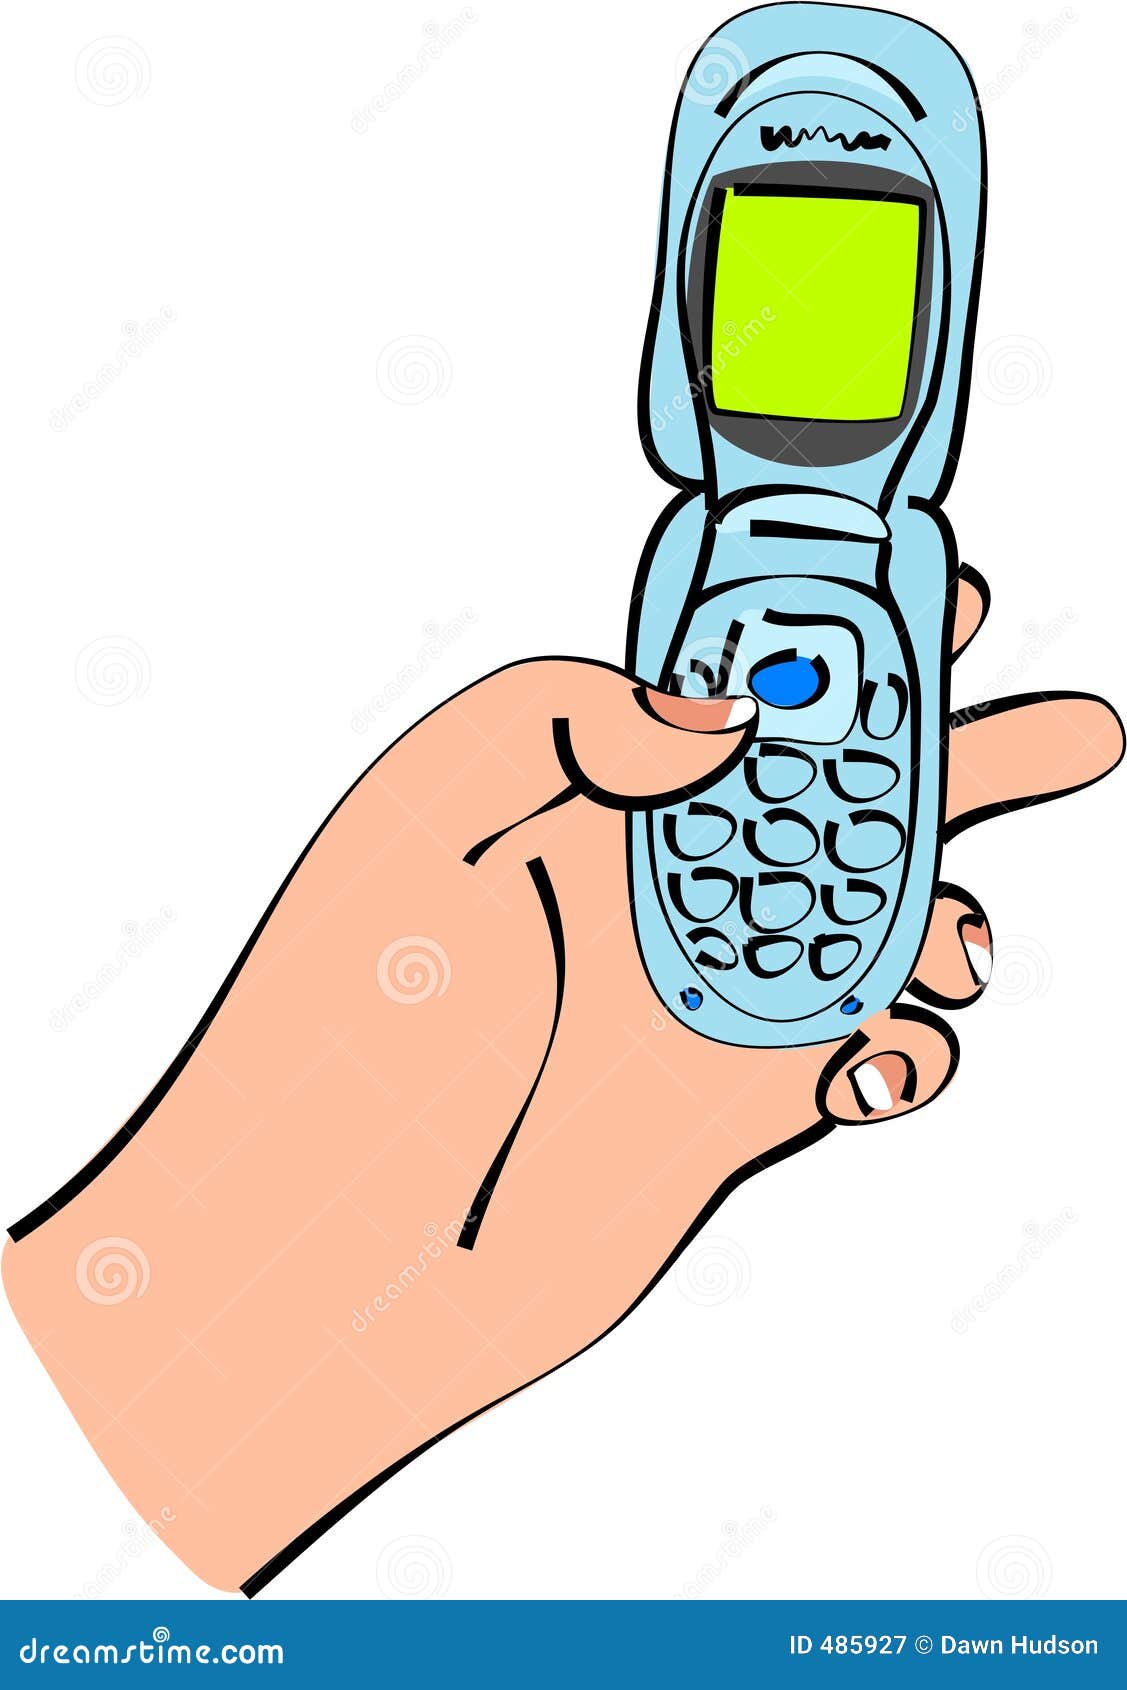 clipart person on phone - photo #47